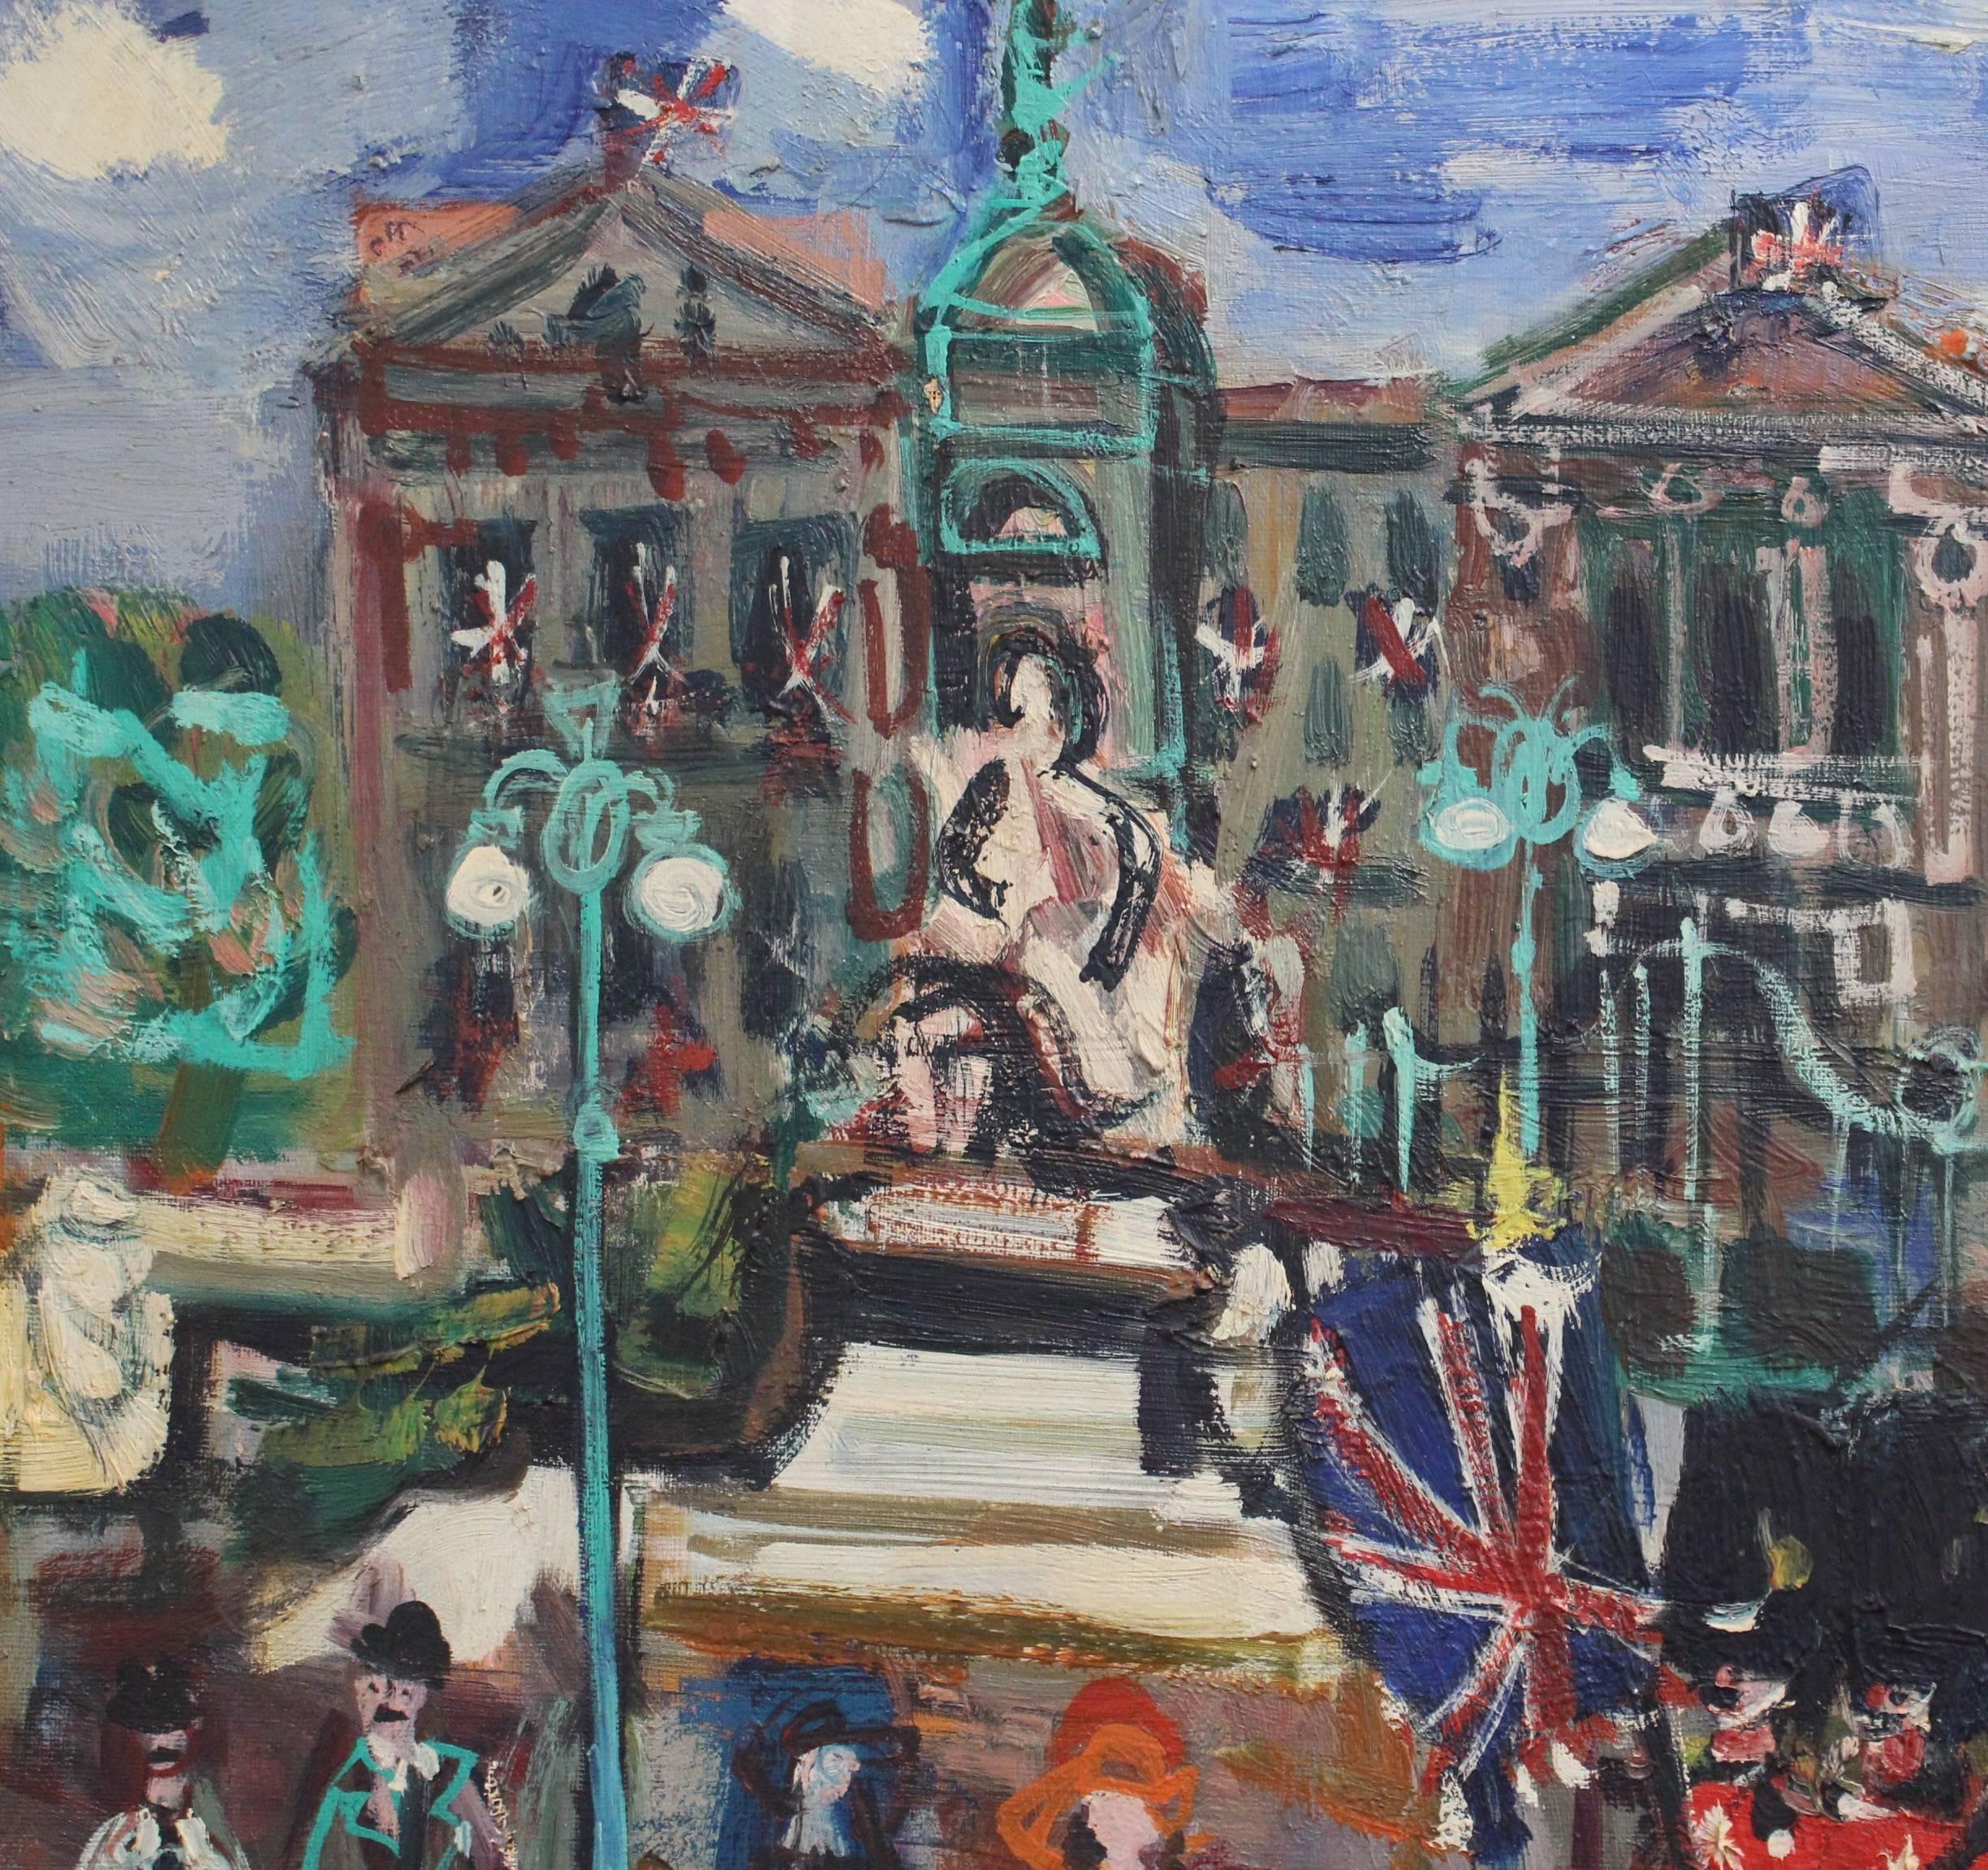 'Changing of the Guard at Buckingham Palace', oil on canvas (circa 1960s), by Maurice Empi (born 1933). Empi loved to paint views of Paris and Venice. This is an extremely rare painting of his featuring a view from the other side of the Channel.